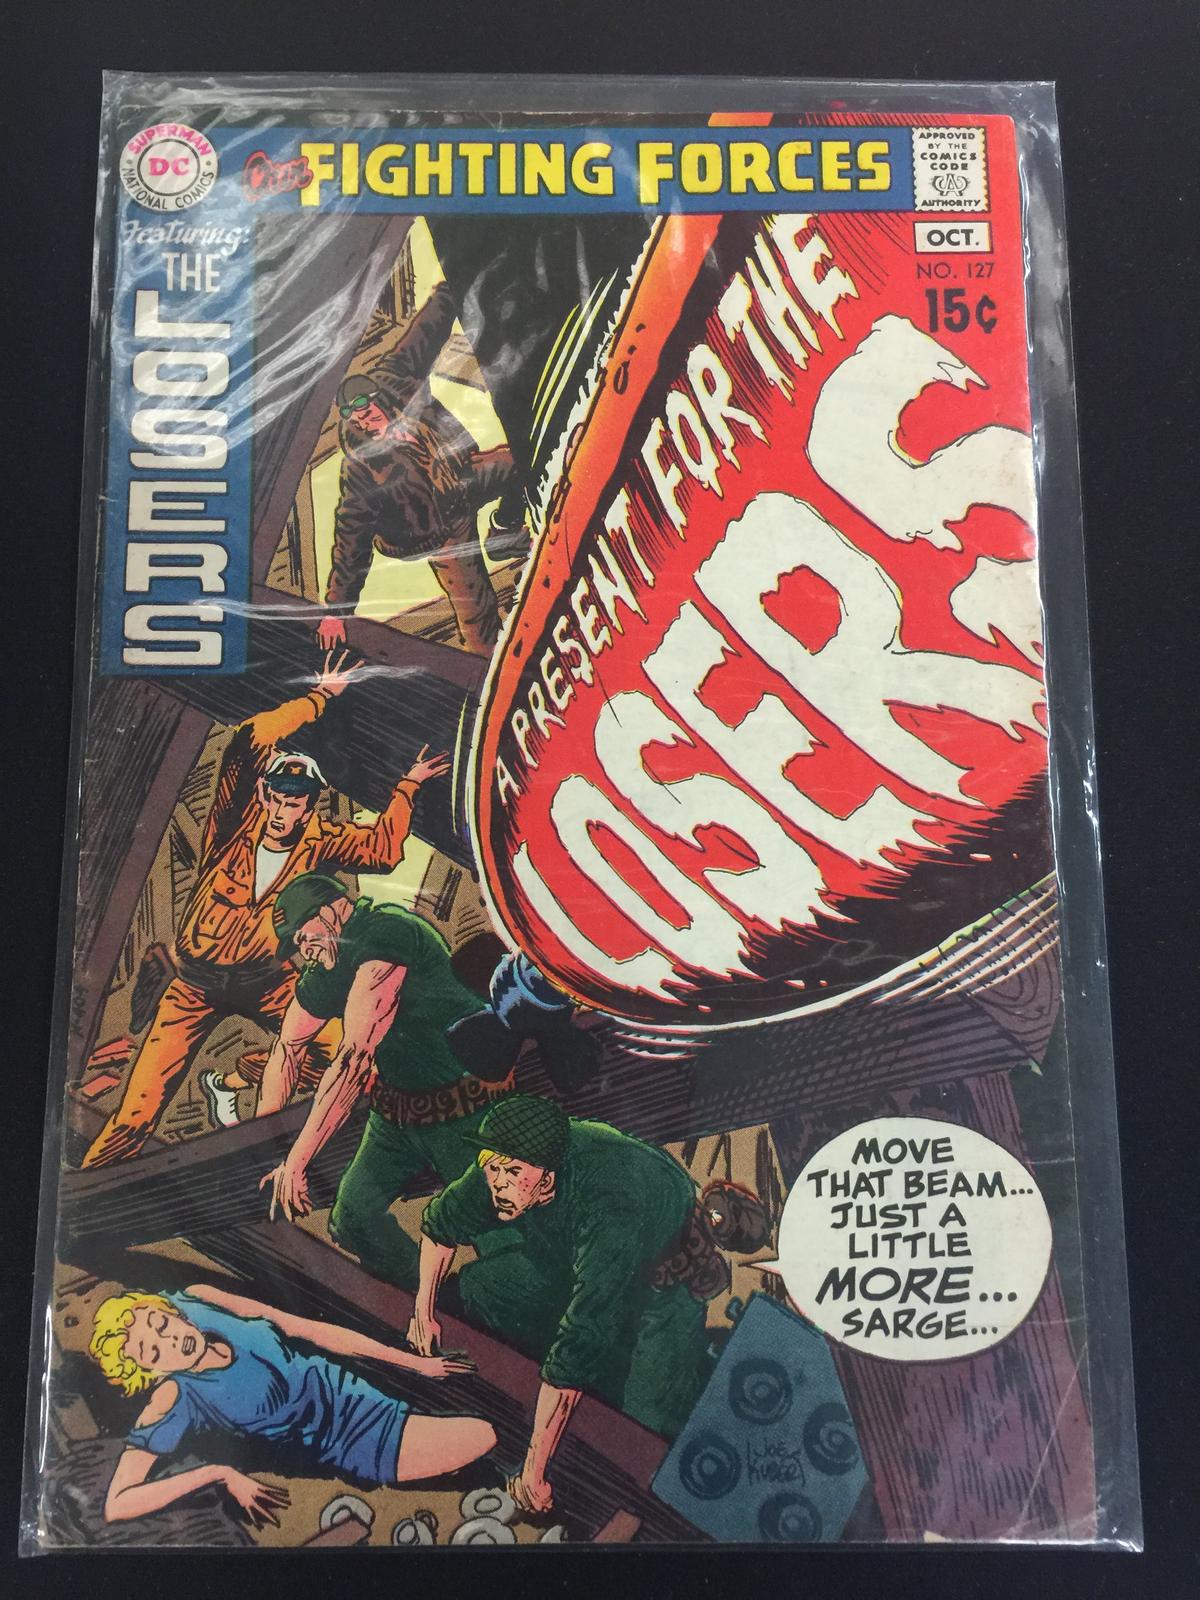 Our Fighting Forces #127-DC Comic Book